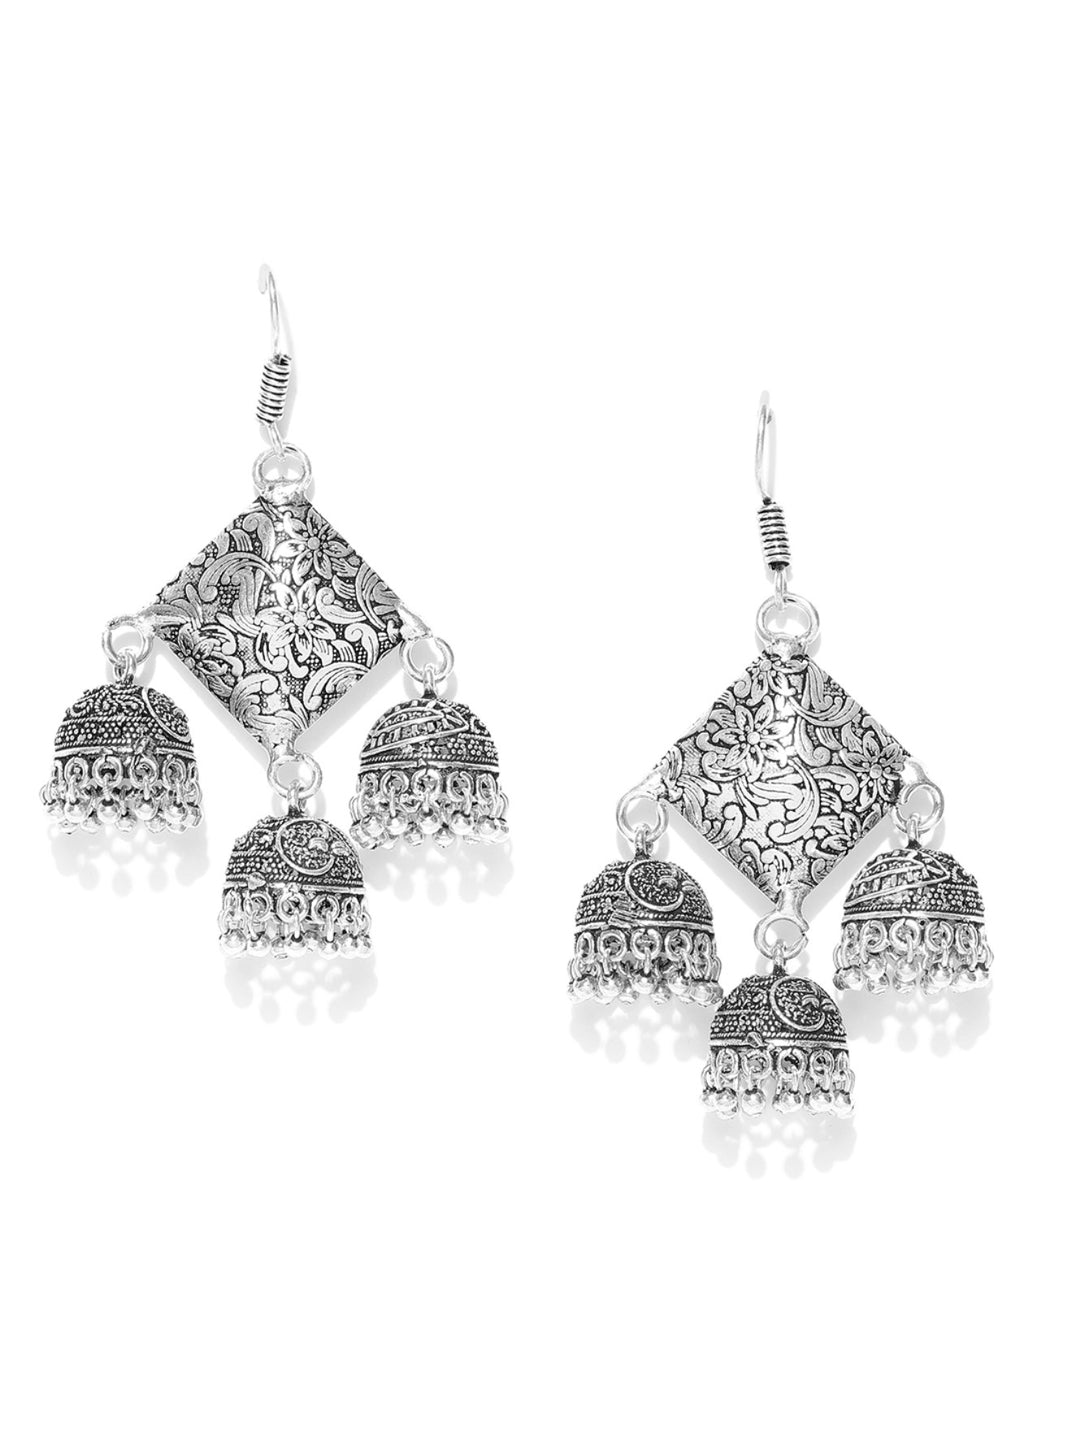 German Silver Square Shape With Triple Jhumki Drop Earrings For Women And Girls